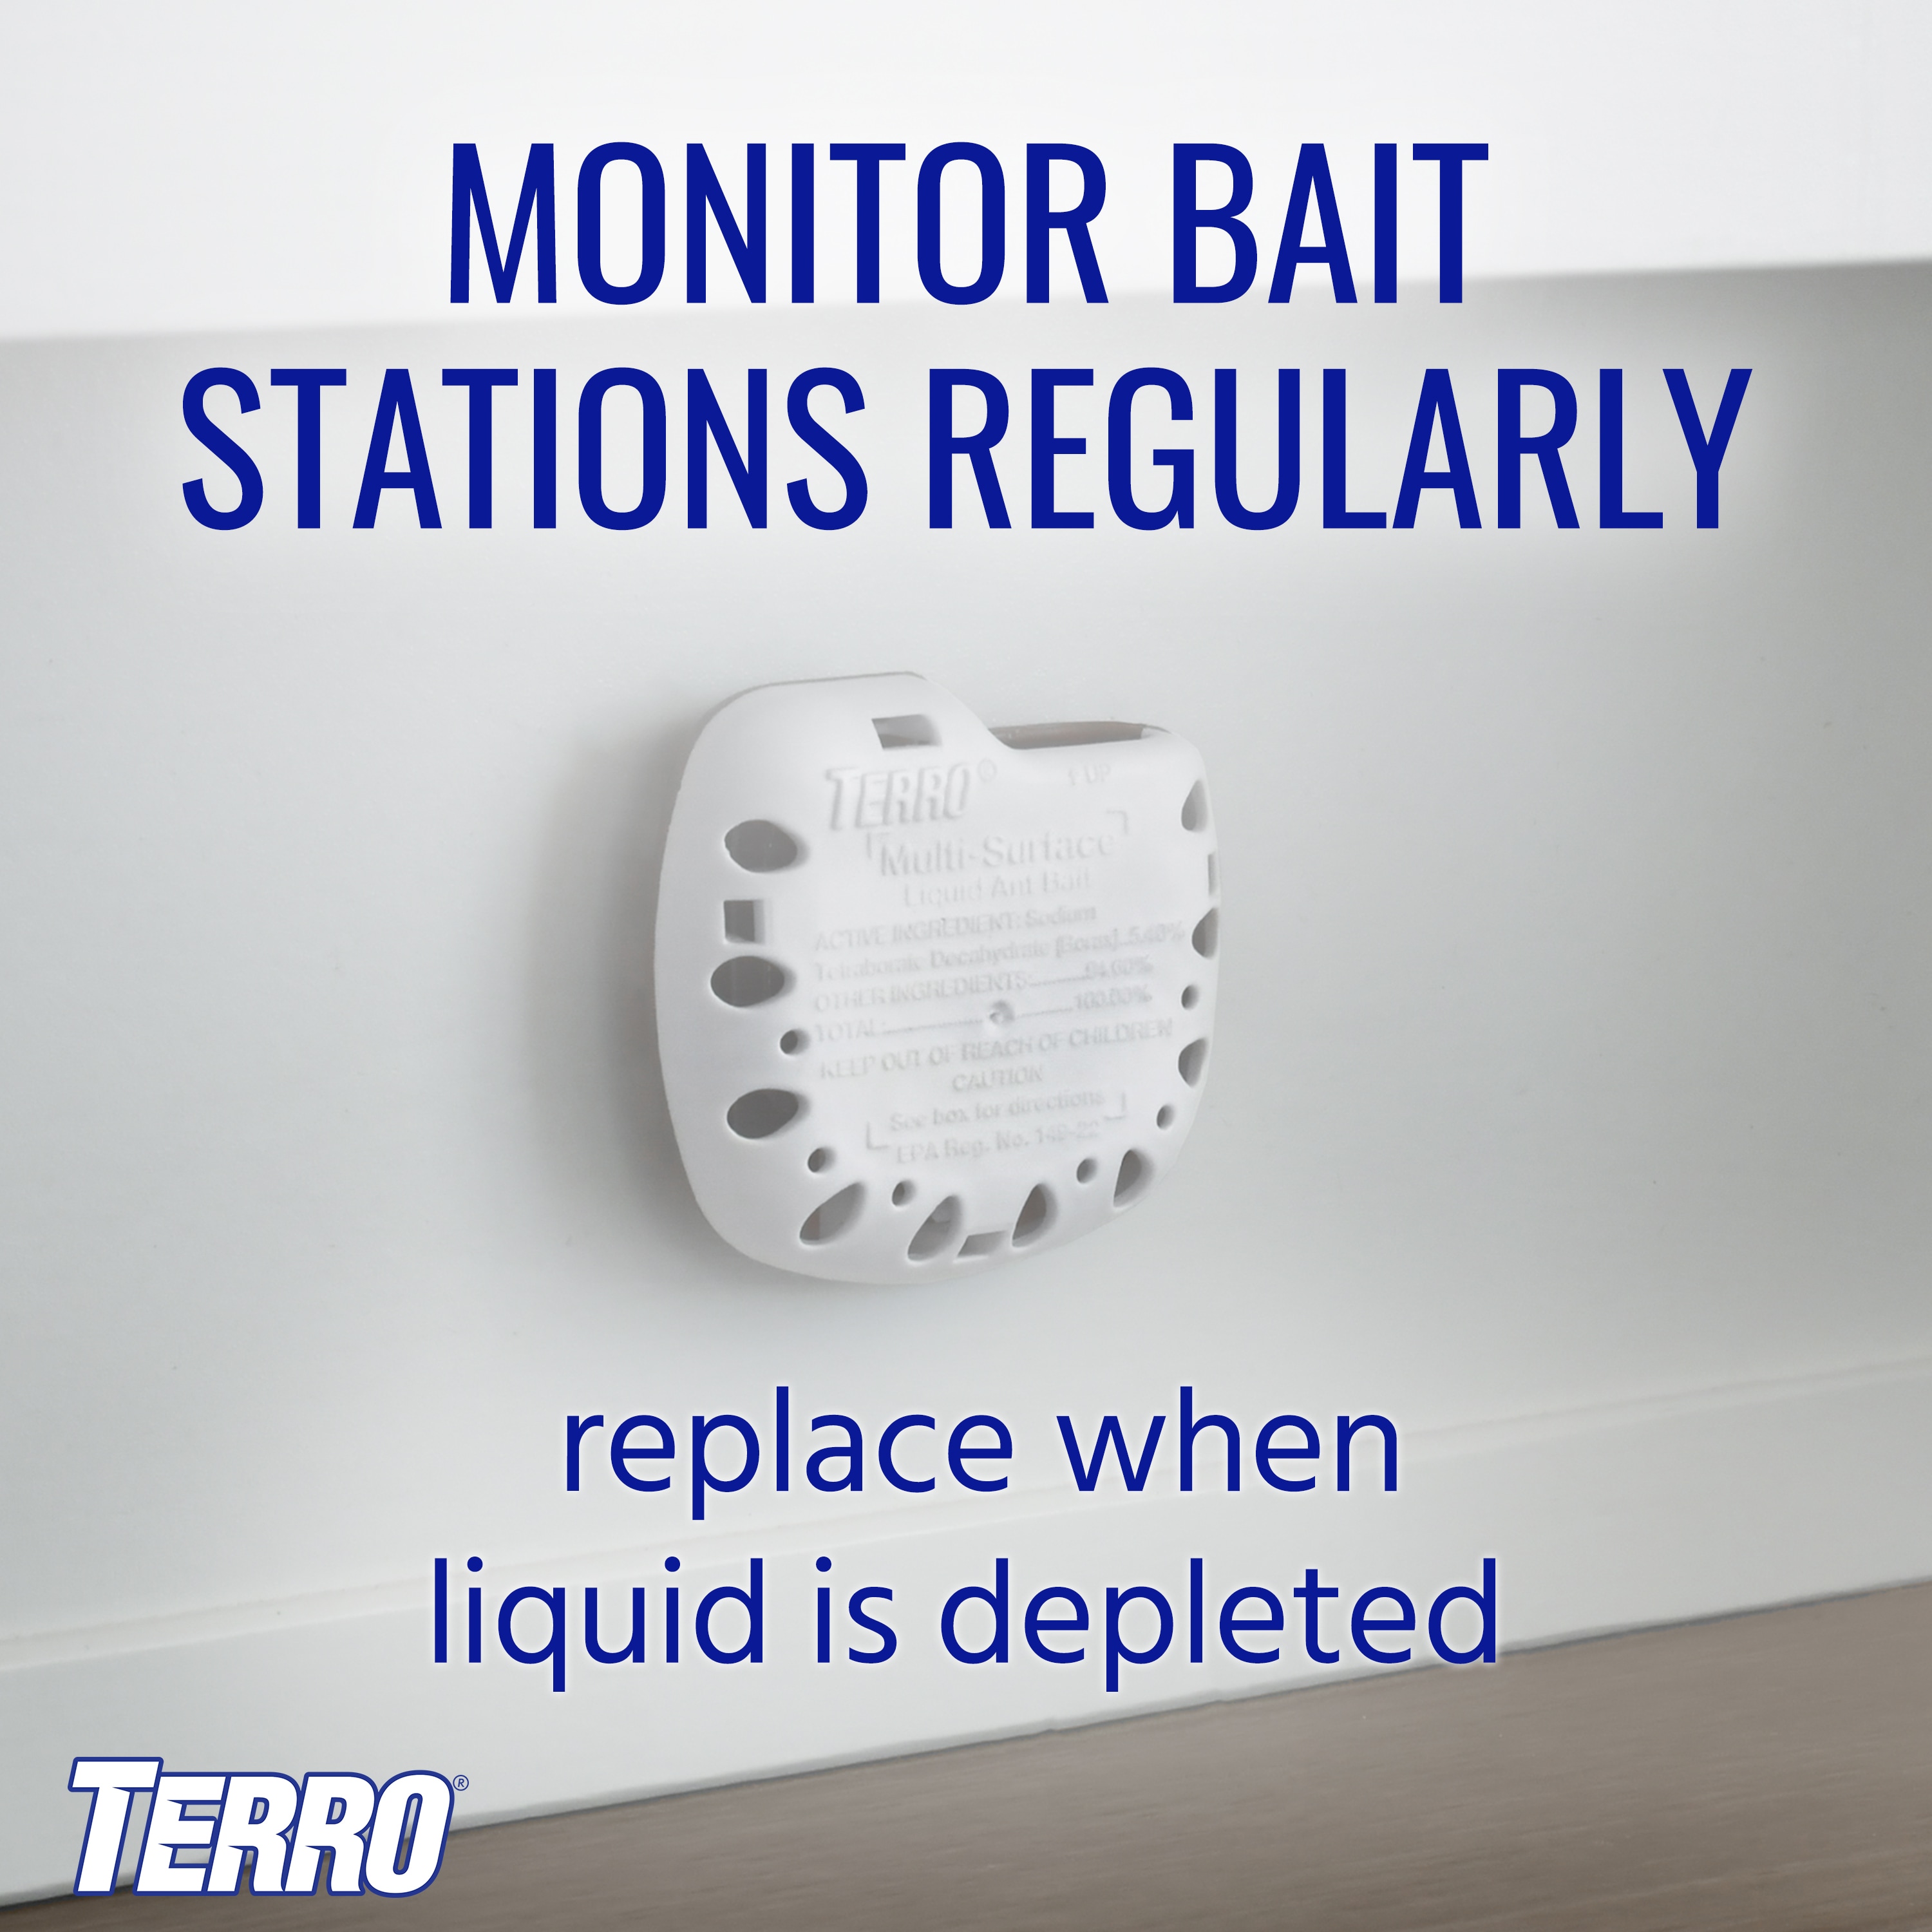 TERRO Multi-Surface Liquid Ant Bait Station (4-Pack) in the